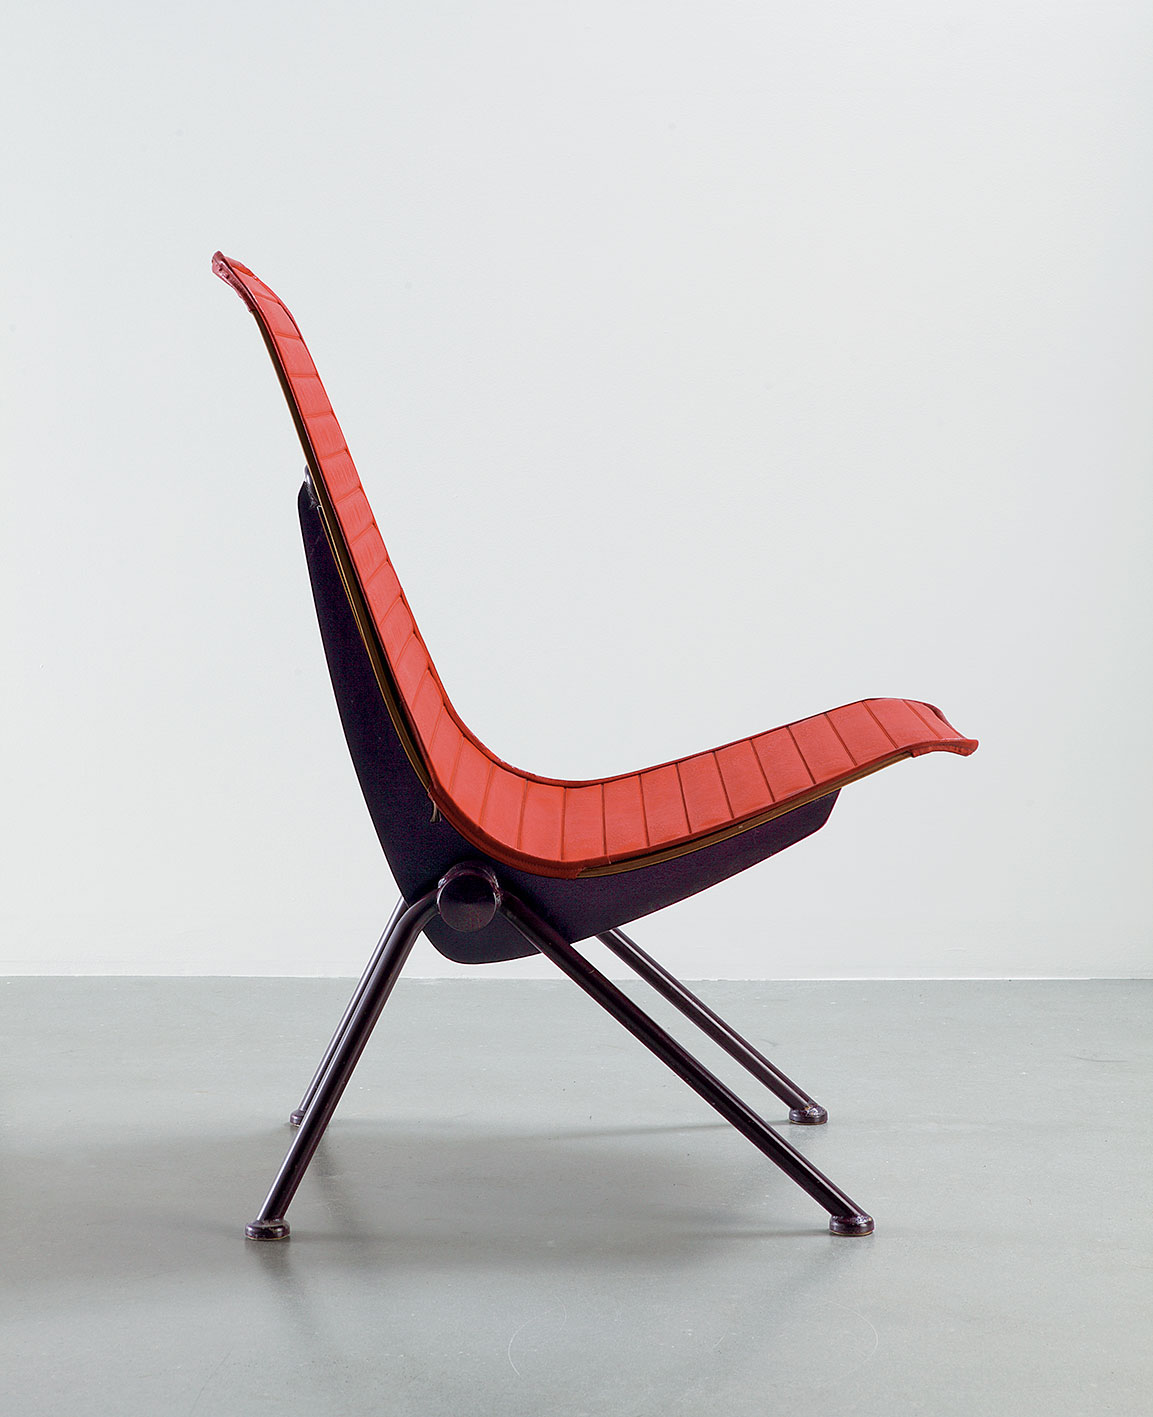 Fauteuil léger no. 356, with a cushioned sheath in imitation leather, 1955.